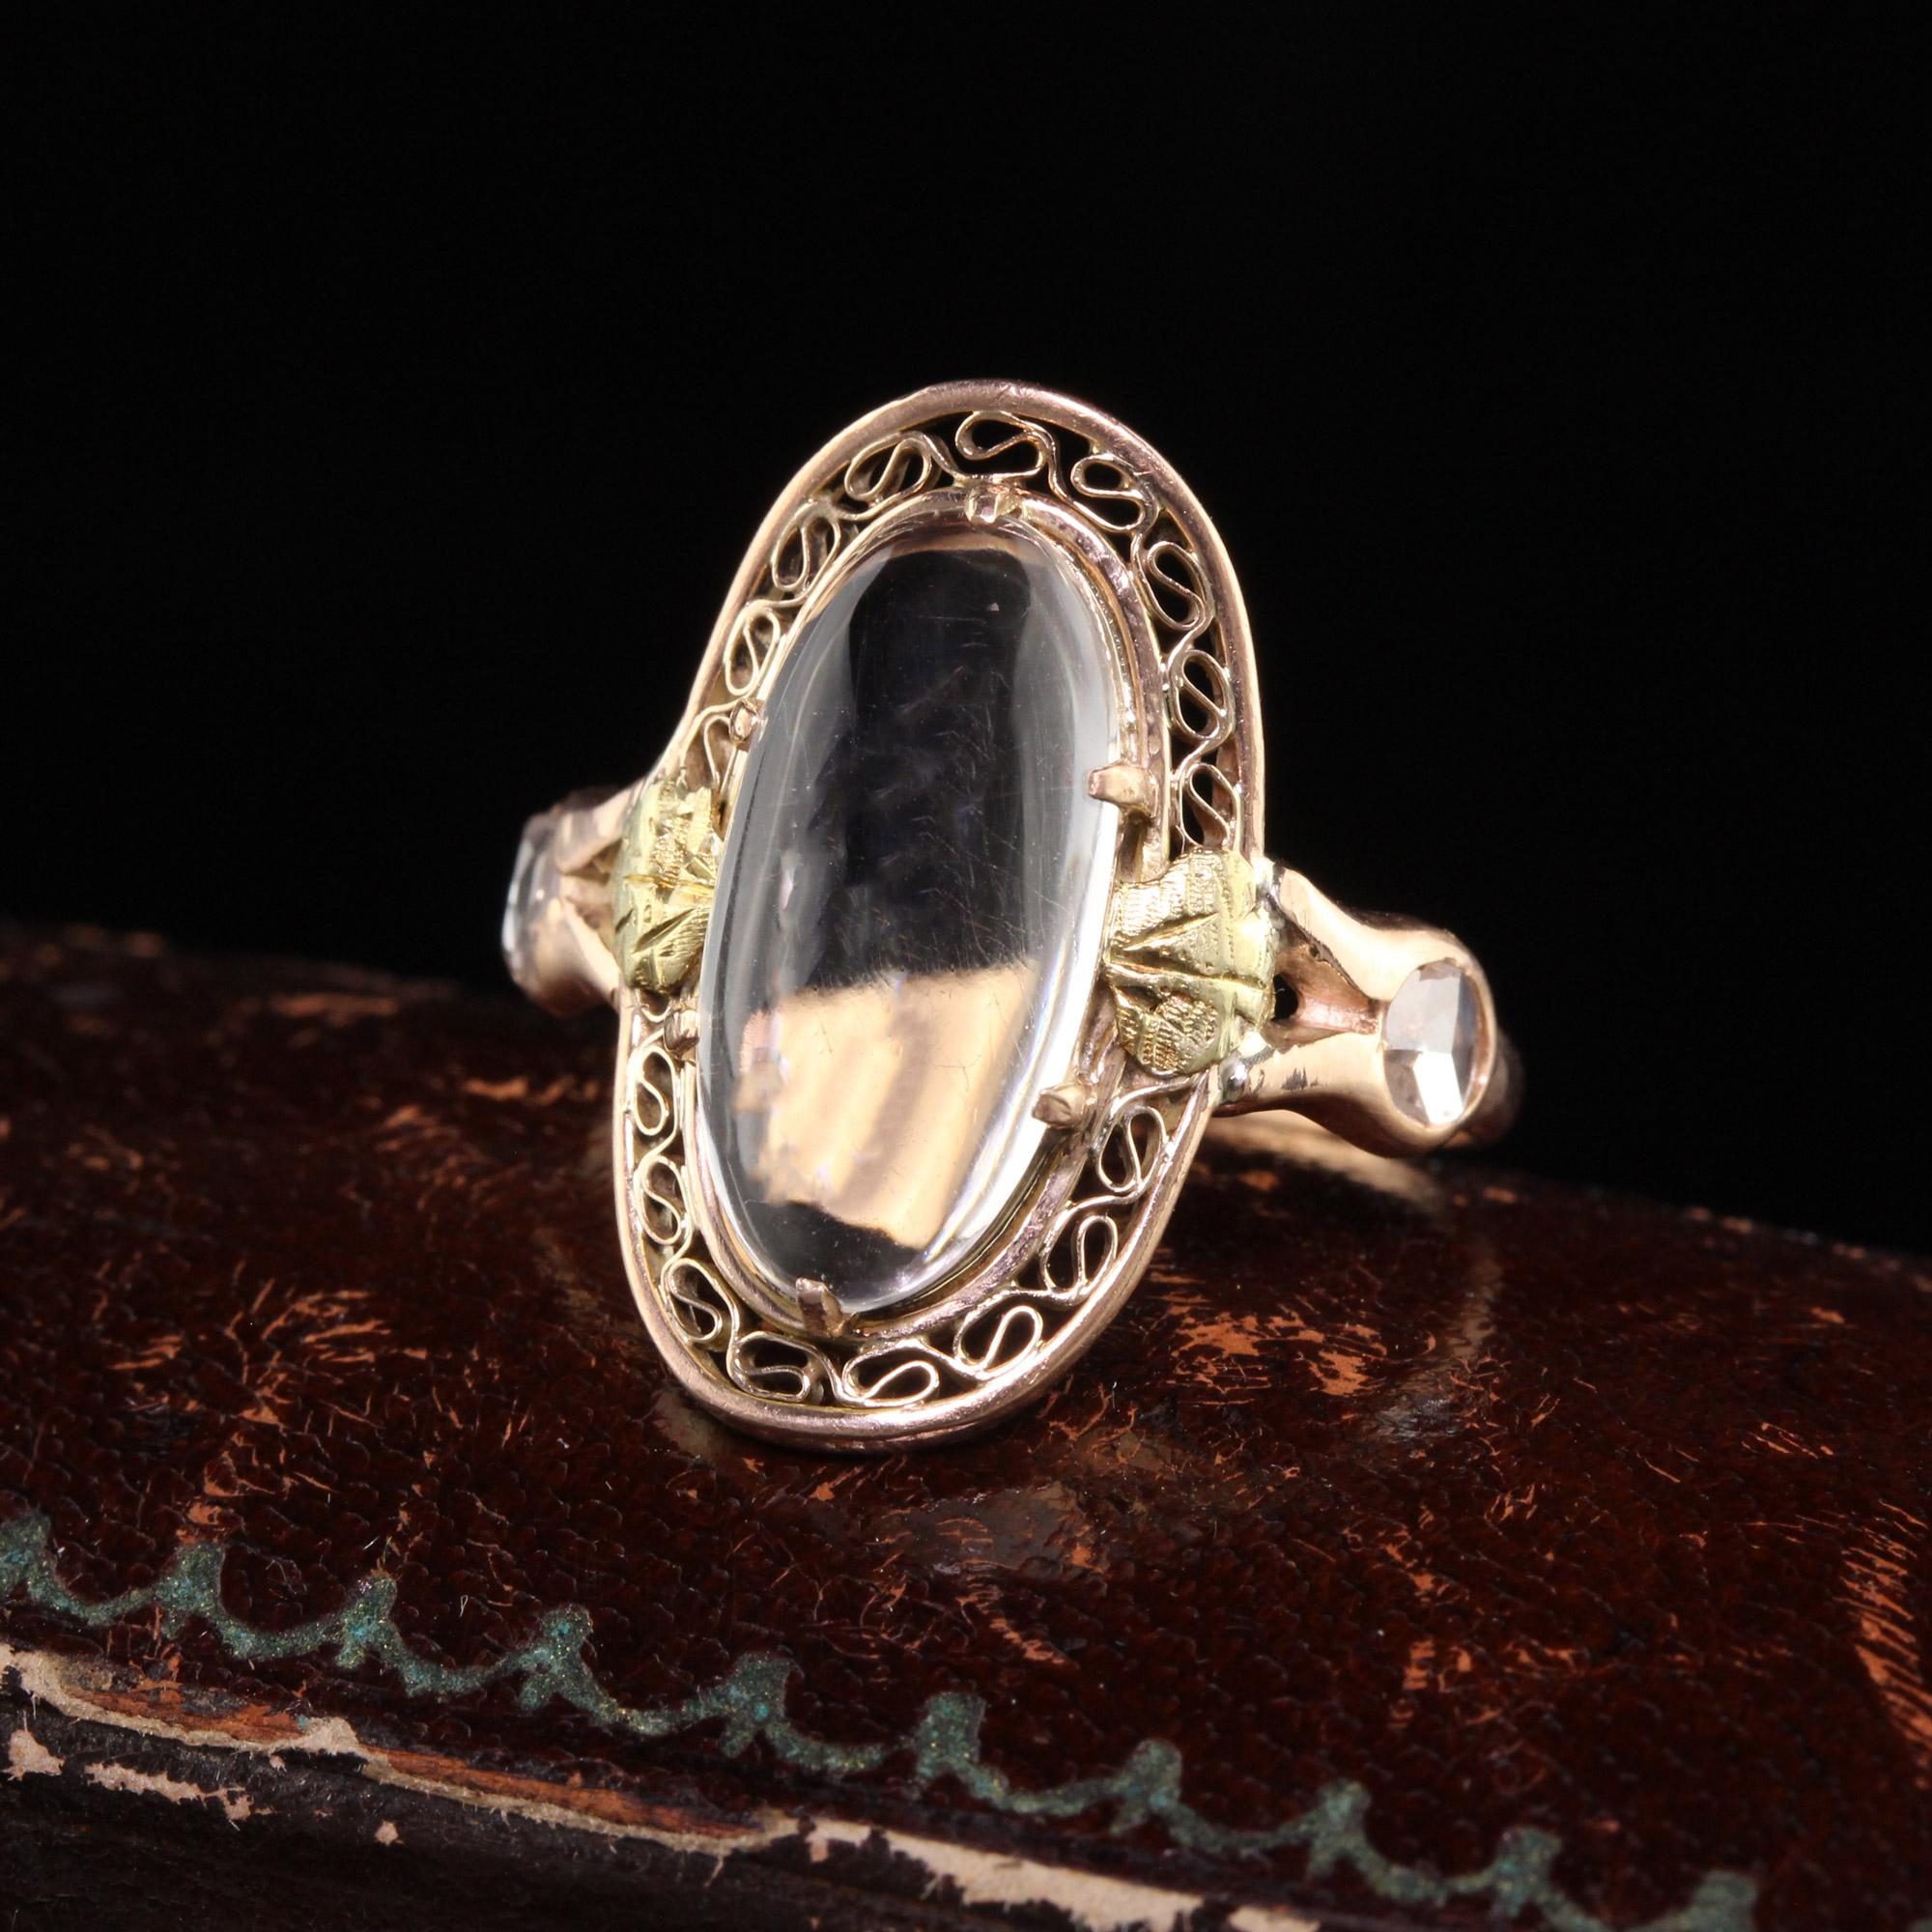 Beautiful Antique Victorian 10K Rose Gold and Yellow Gold Moonstone Rose Cut Diamond Ring. This beautiful ring is crafted in 10k rose gold and yellow gold accents. The ring has a nice moonstone on the top with two white rose cut diamonds on the